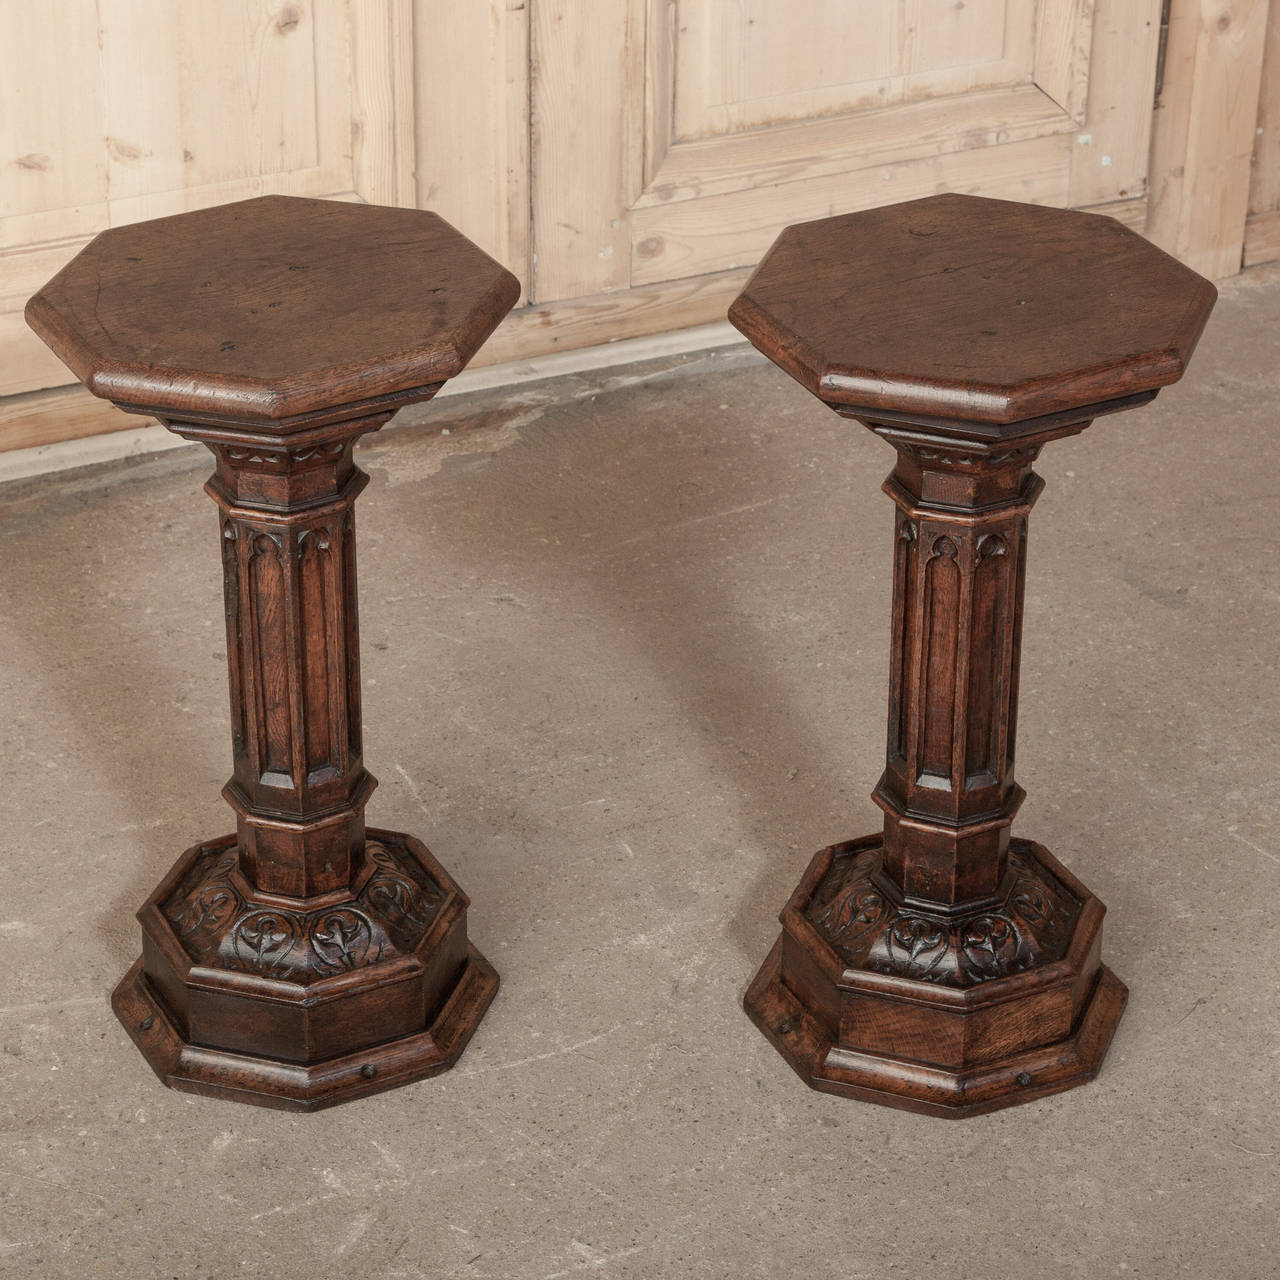 Hand-Carved Pair of 19th Century Gothic Pedestals